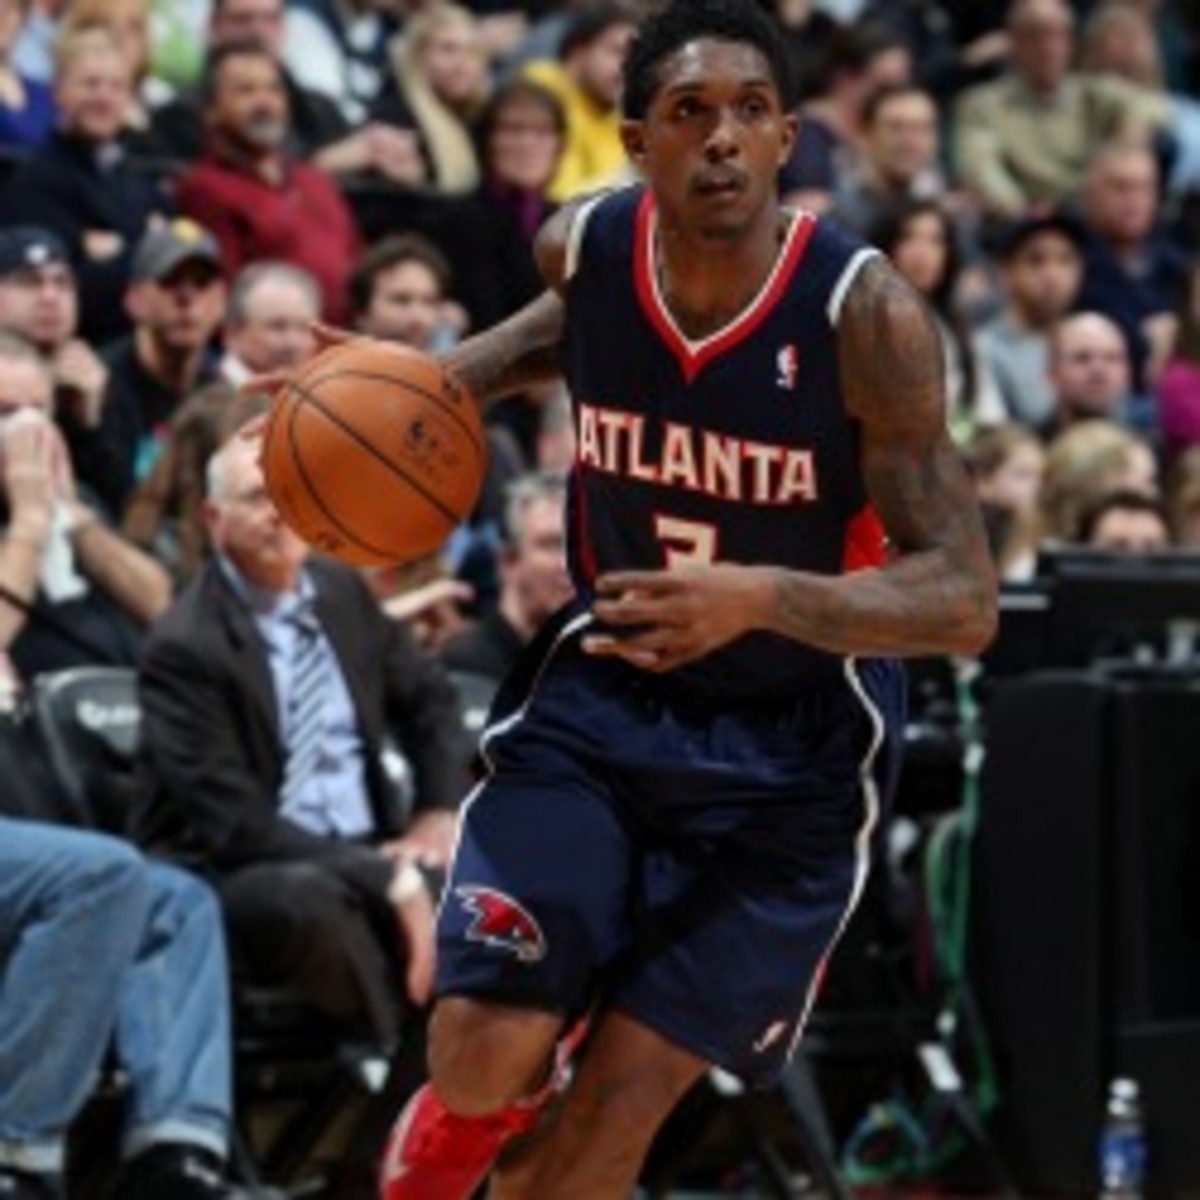 Hawks guard Lou Williams was averaging 14.1 points per game this season after signing as a free agent. (David Sherman/Getty Images)